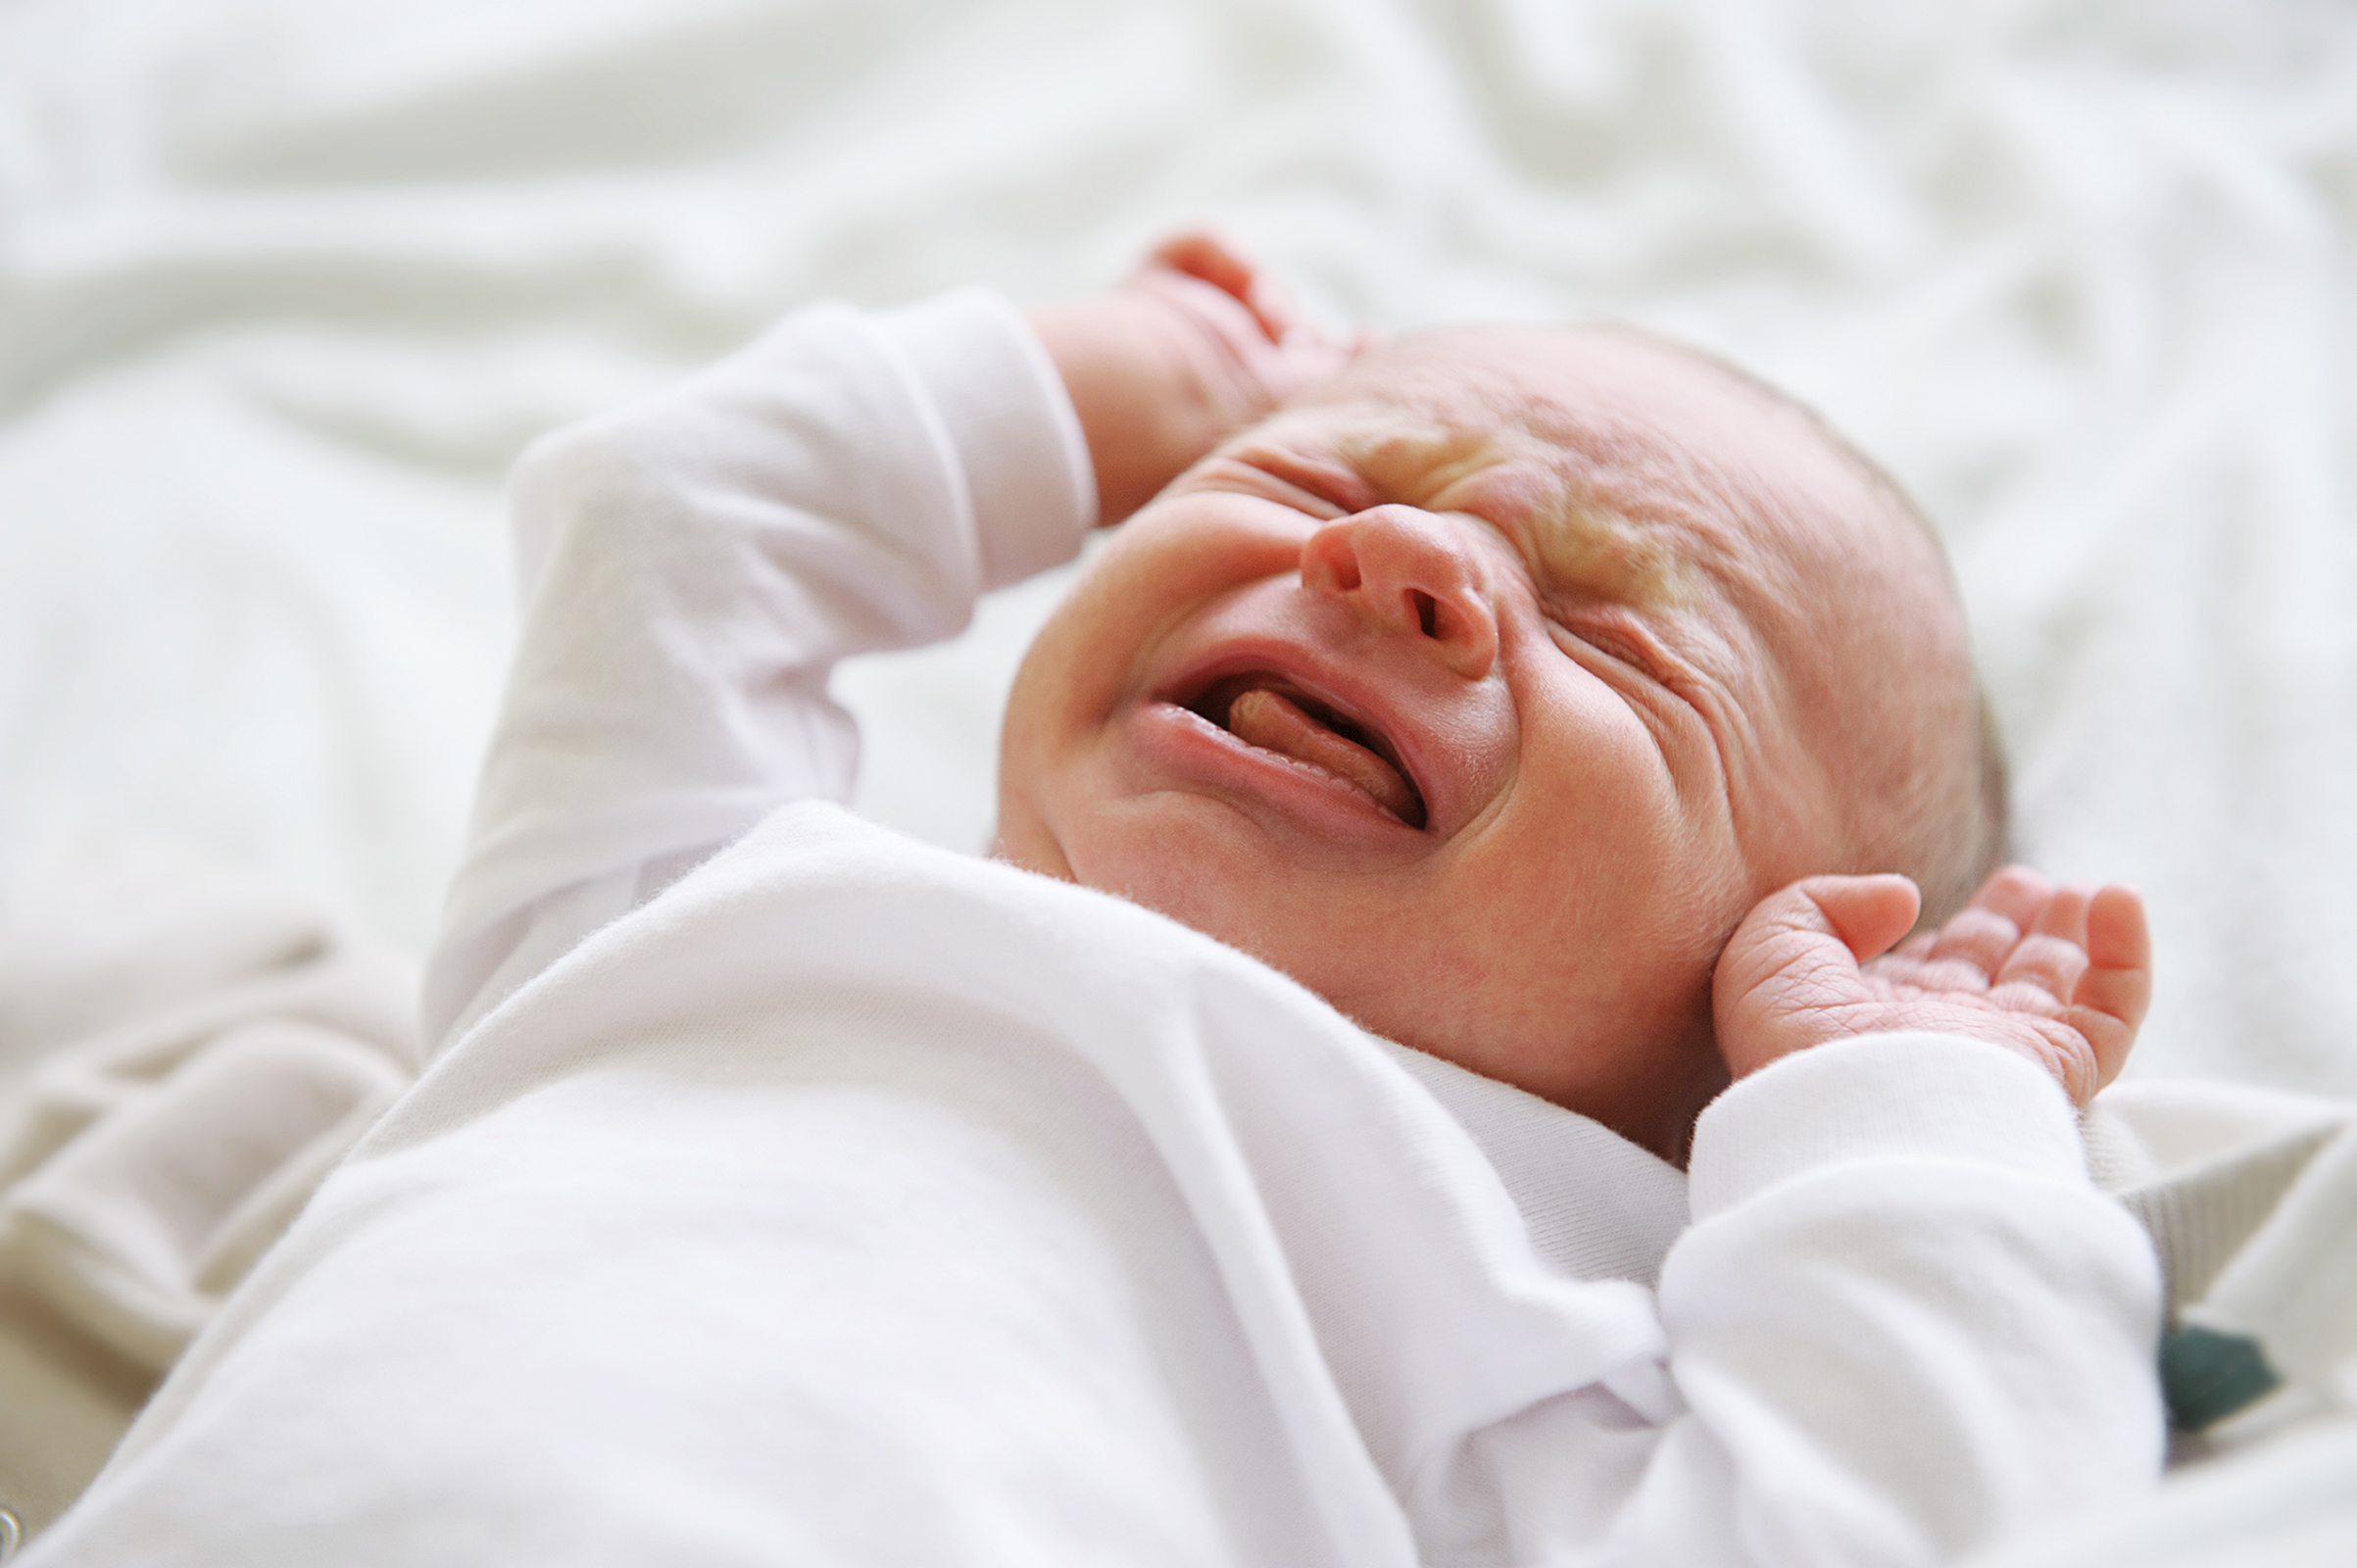 A baby crying | Source: Shutterstock